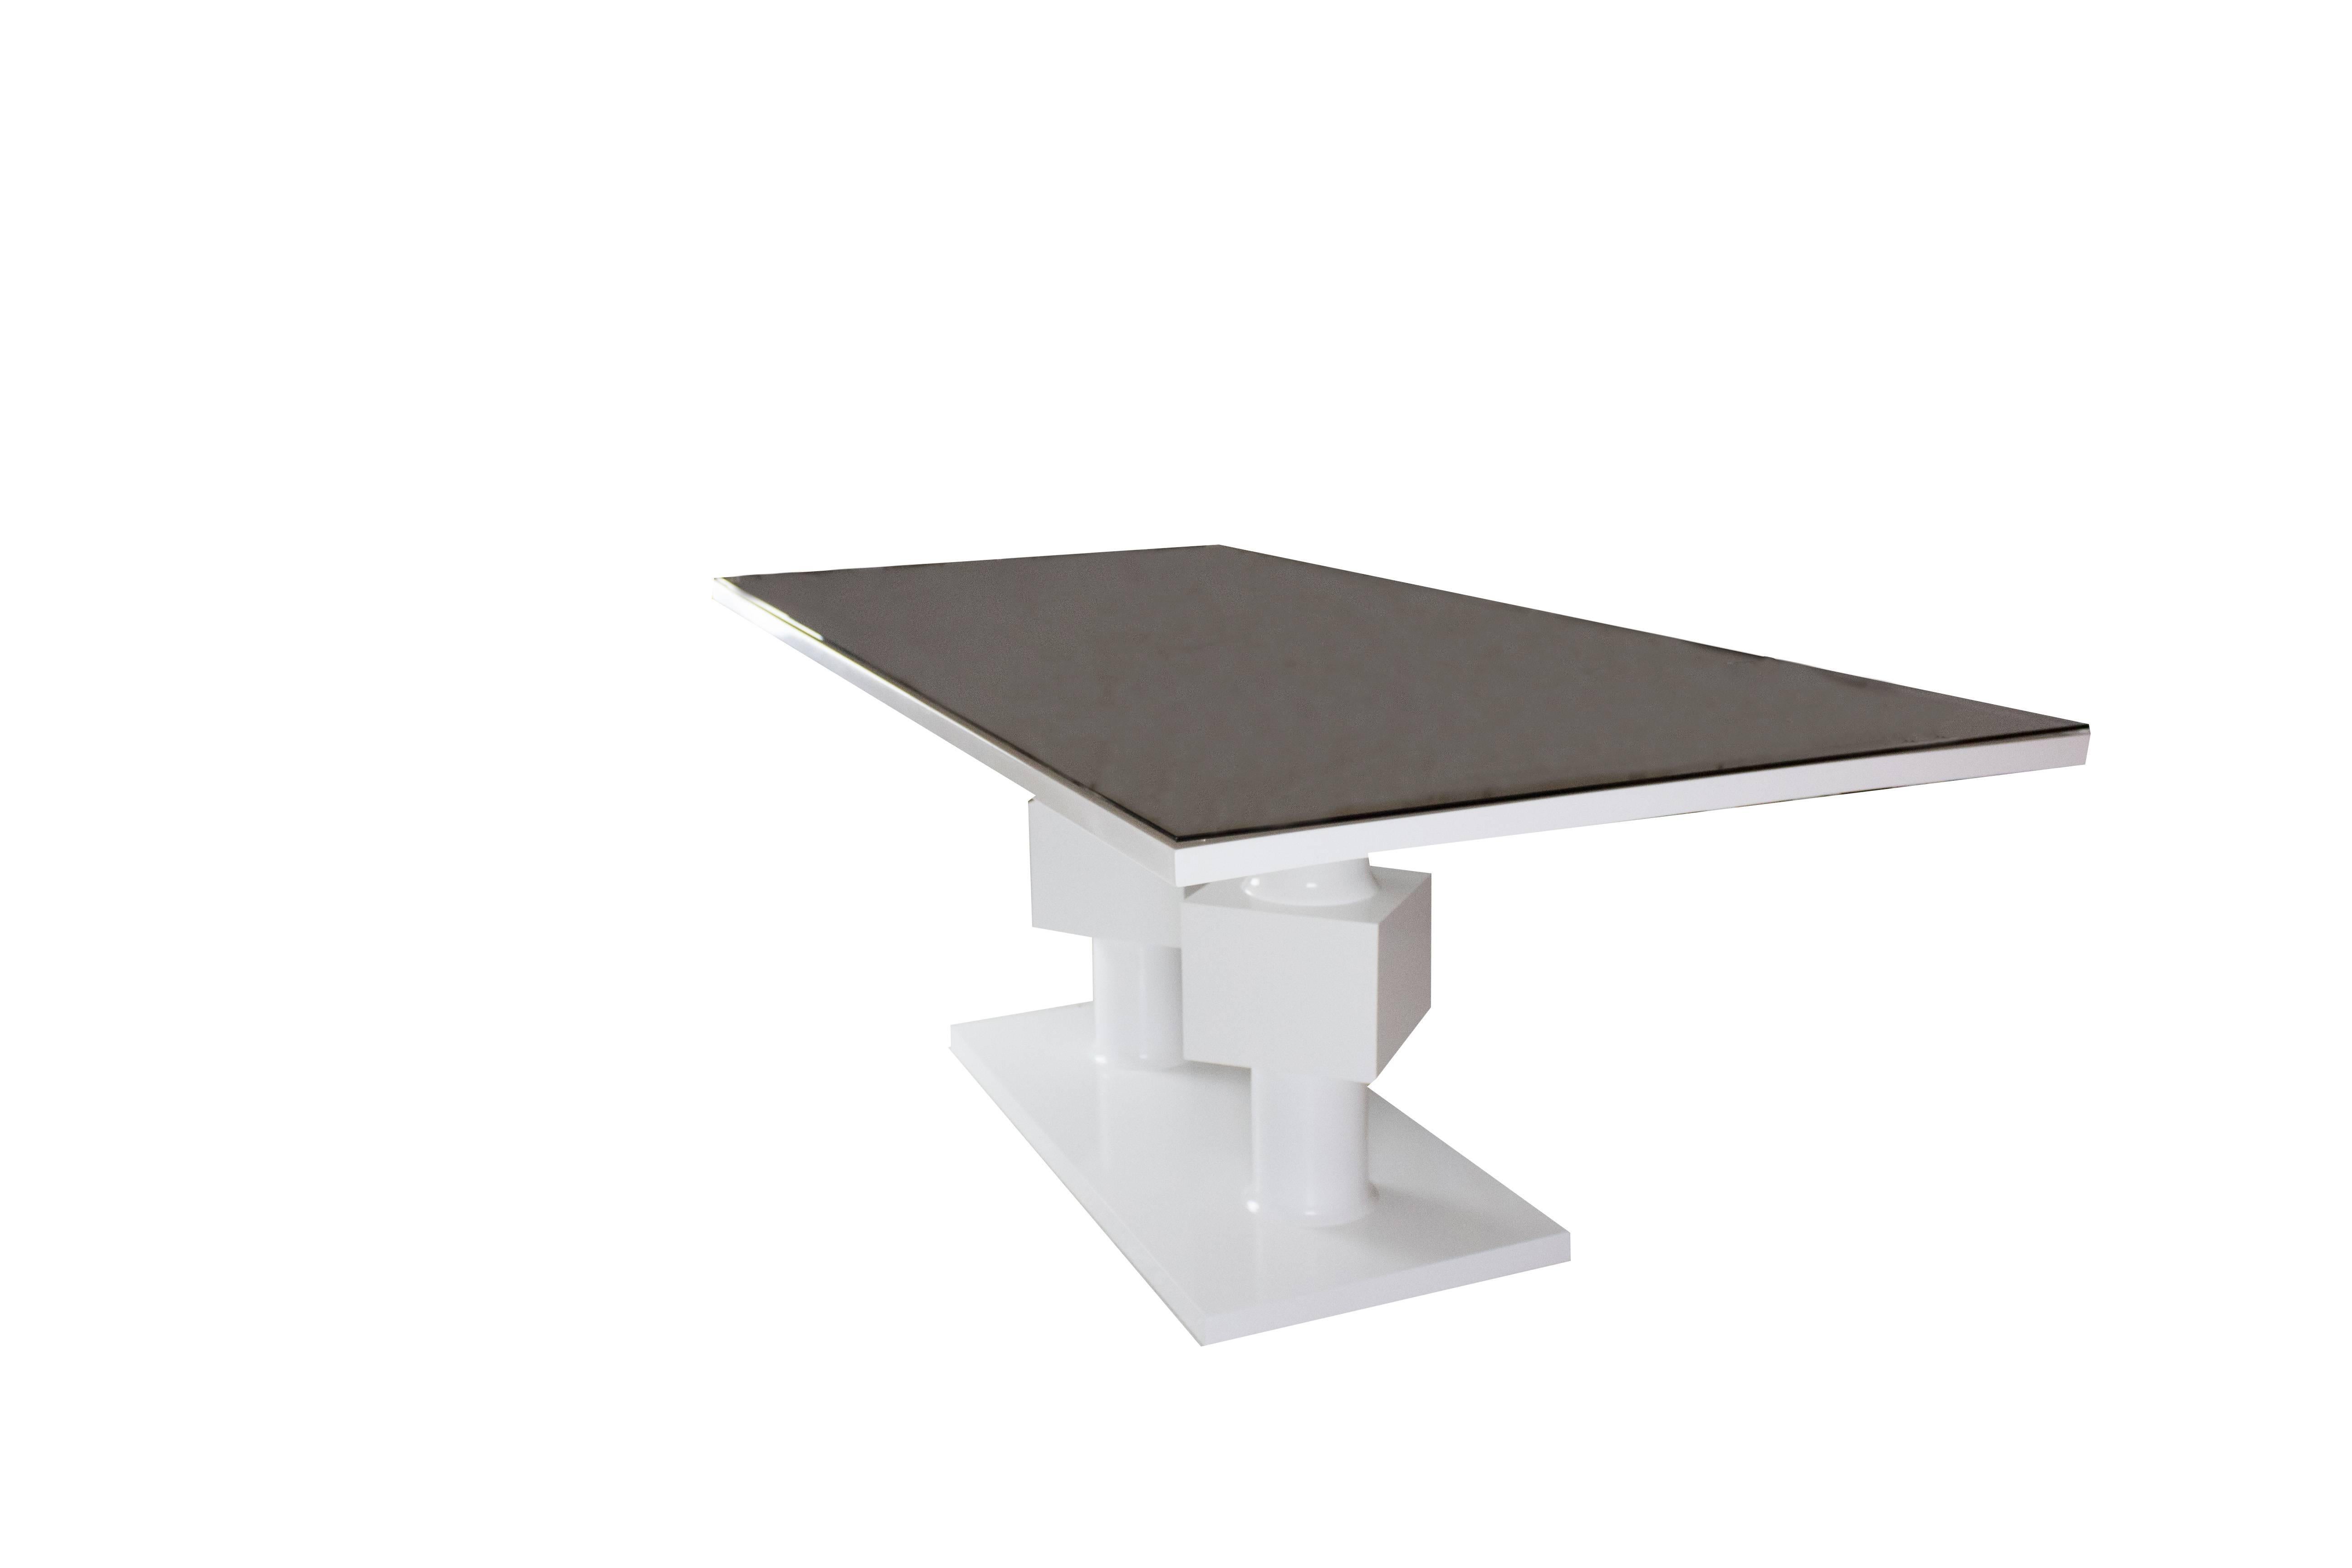 Sit eight people at our Gabietta table. Bronzed glass top and maple wood base lacquered in white. Handmade by us in Norwalk, Connecticut. 

Measurements: 30